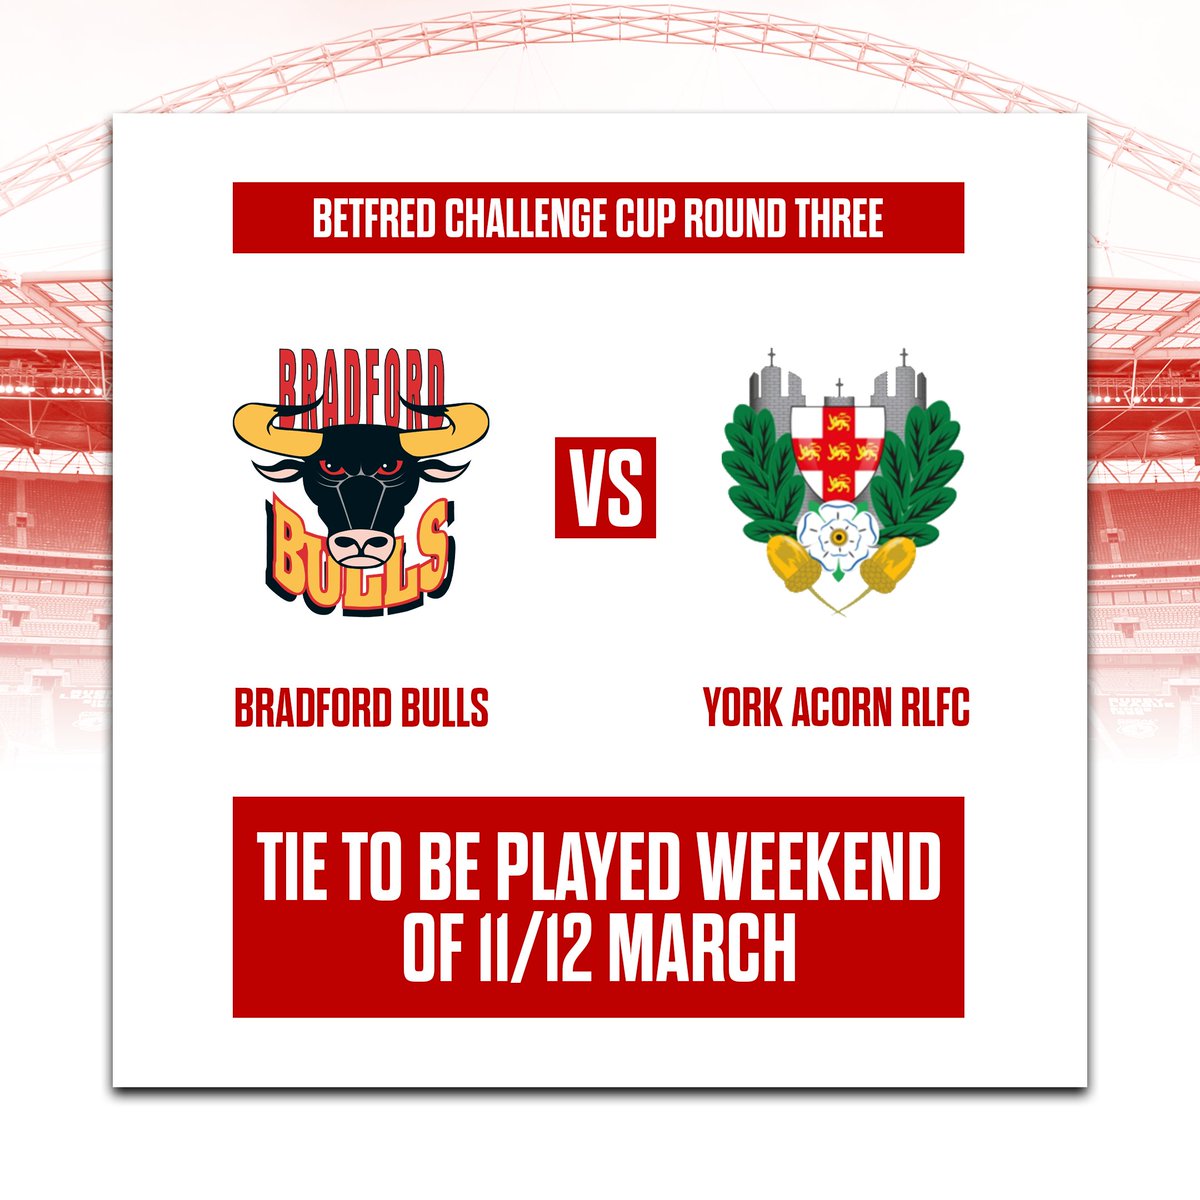 🆚 | We welcome @yorkacorn to Odsal Stadium in Round Three of the @Betfred @TheChallengeCup! 📅 | Tie to be played 11/12 March - ticket details to be revealed in due course.